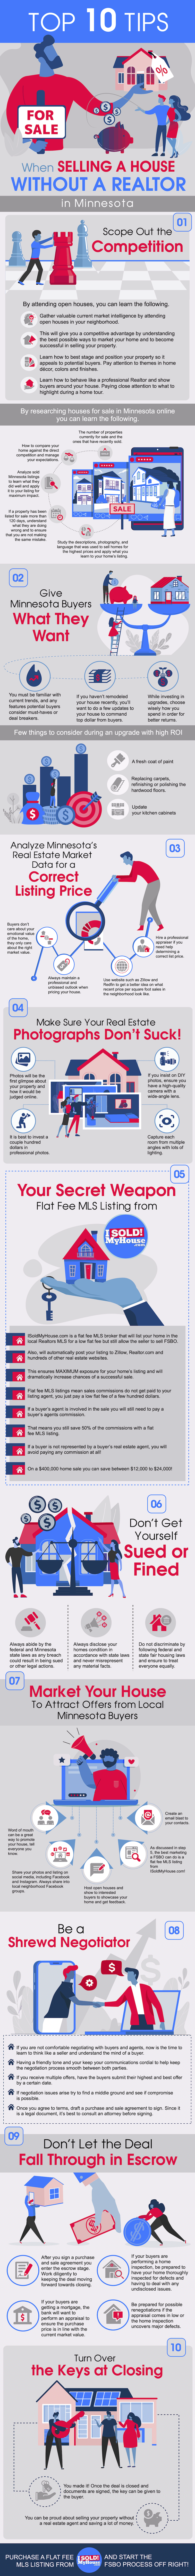 infographic of the 10 steps to sell a house in minnesota without an agent